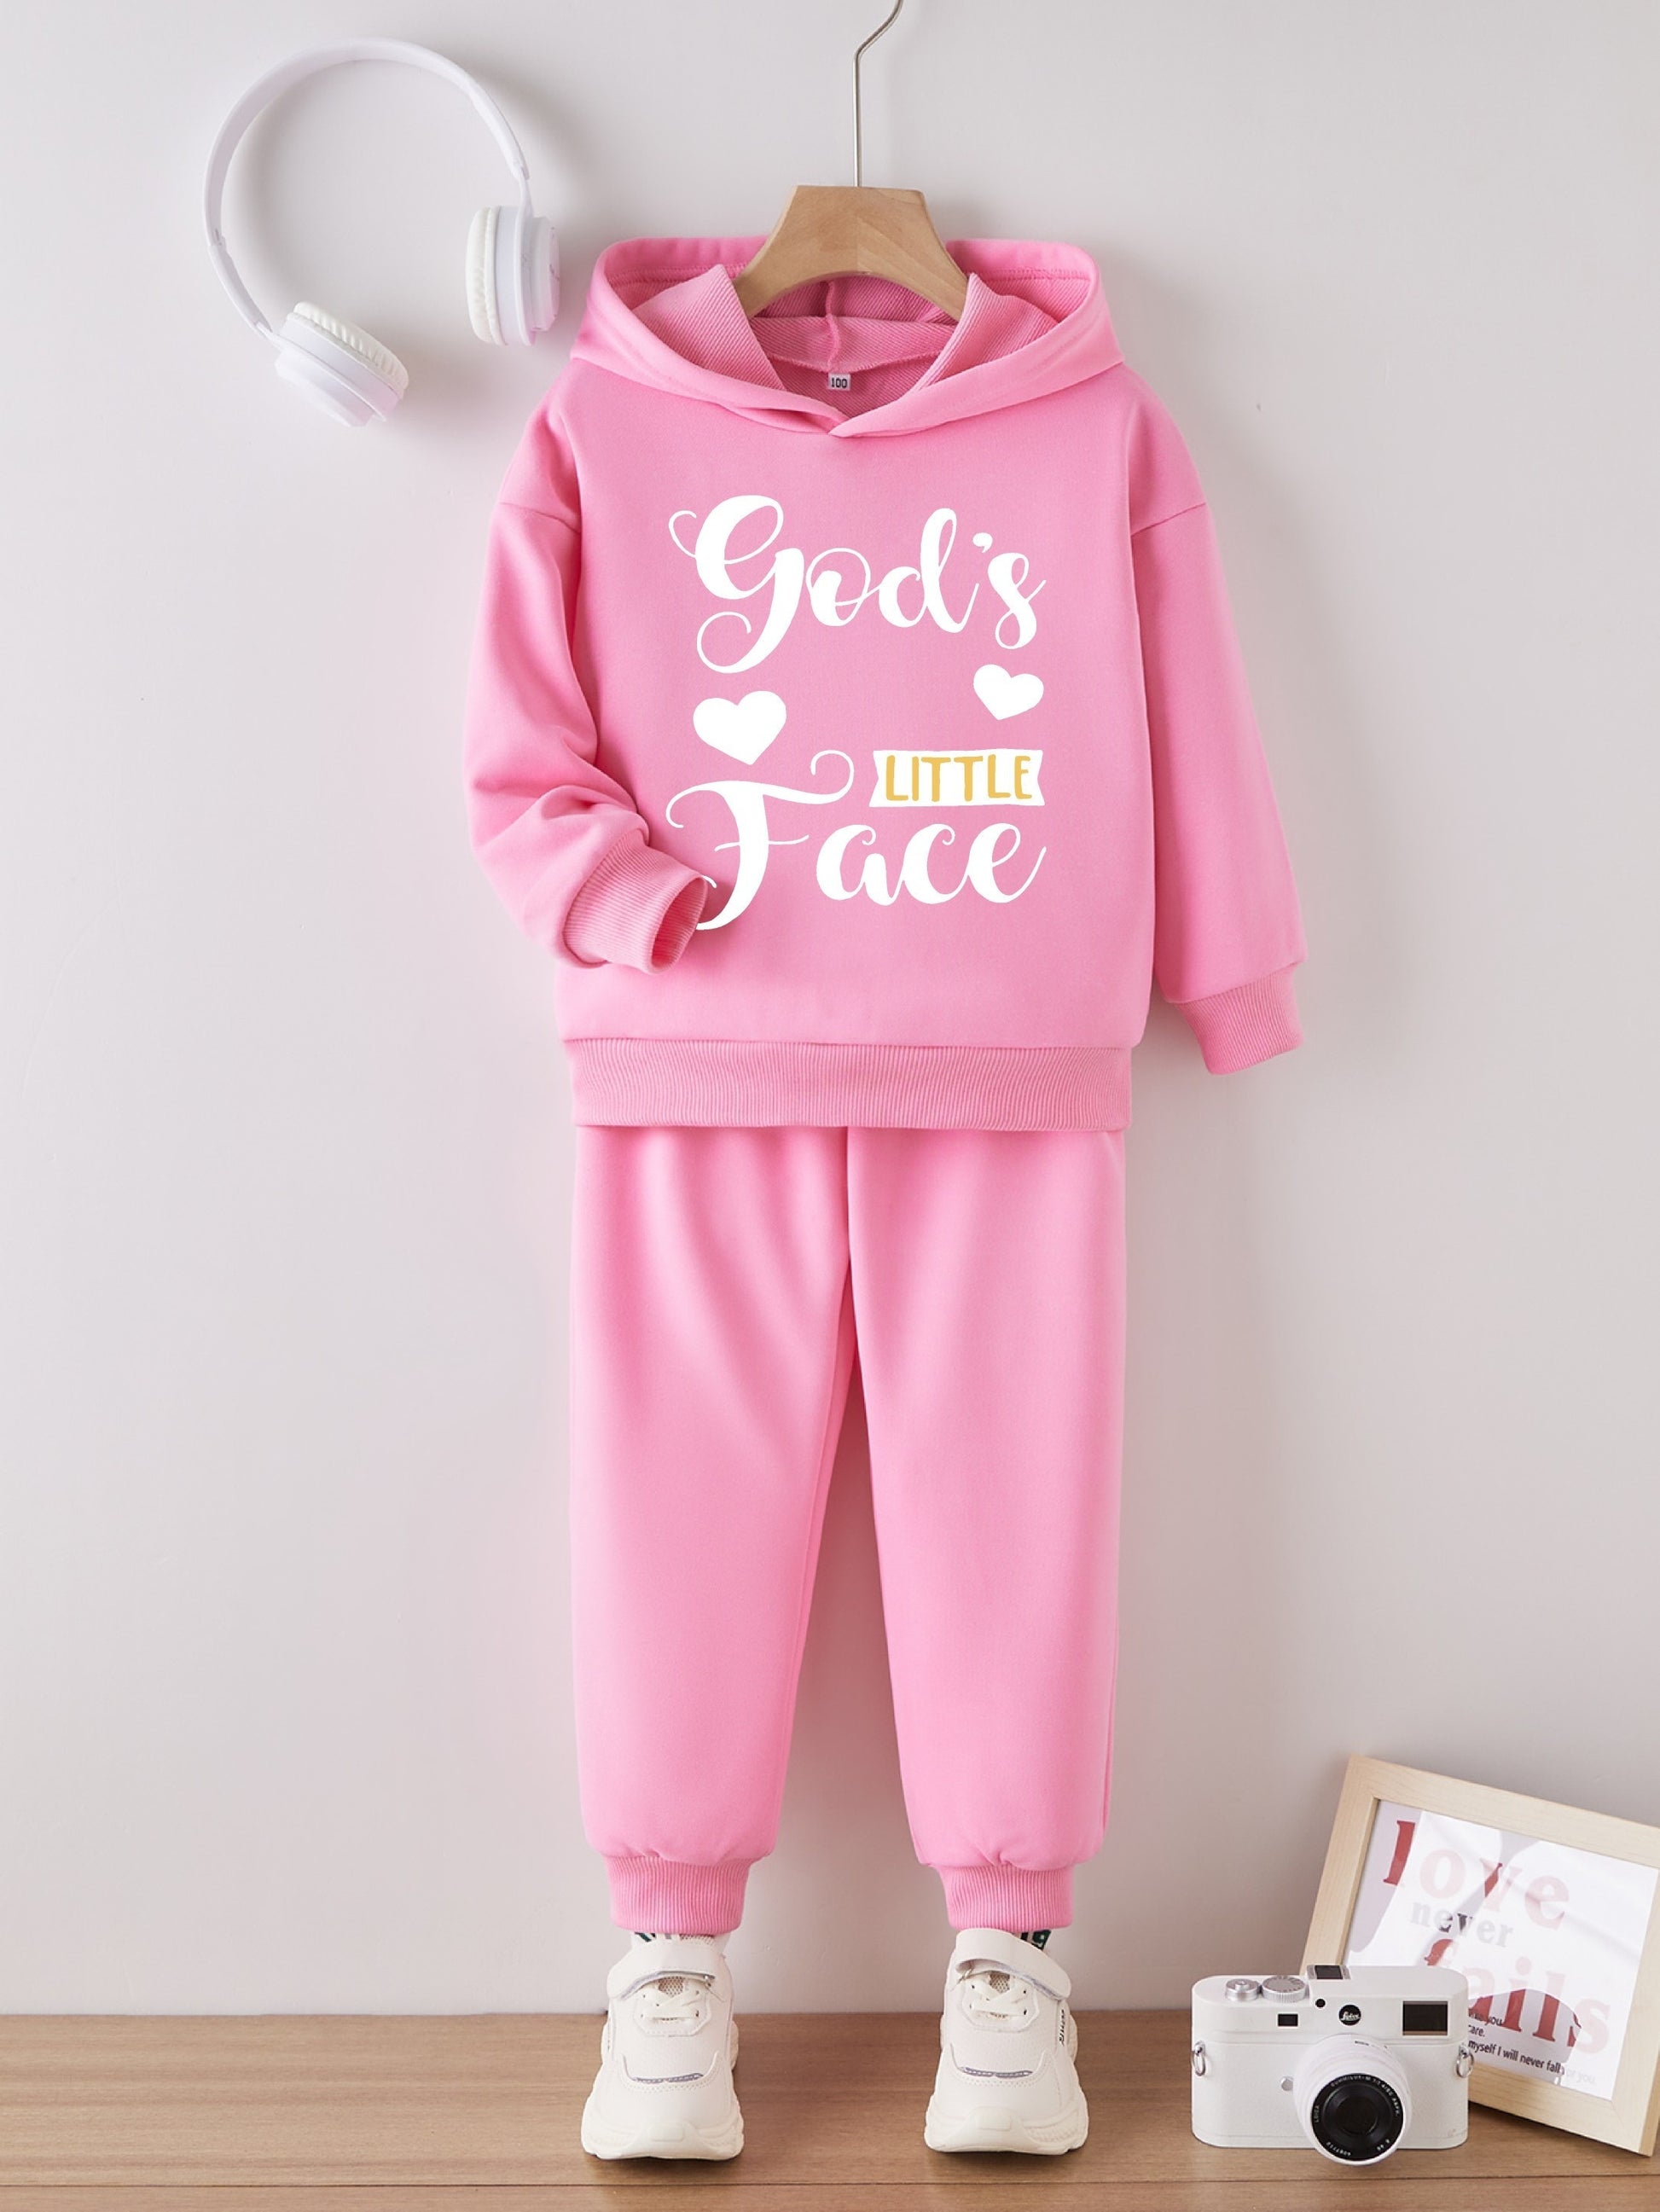 God's Little Face Youth Christian Casual Outfit claimedbygoddesigns